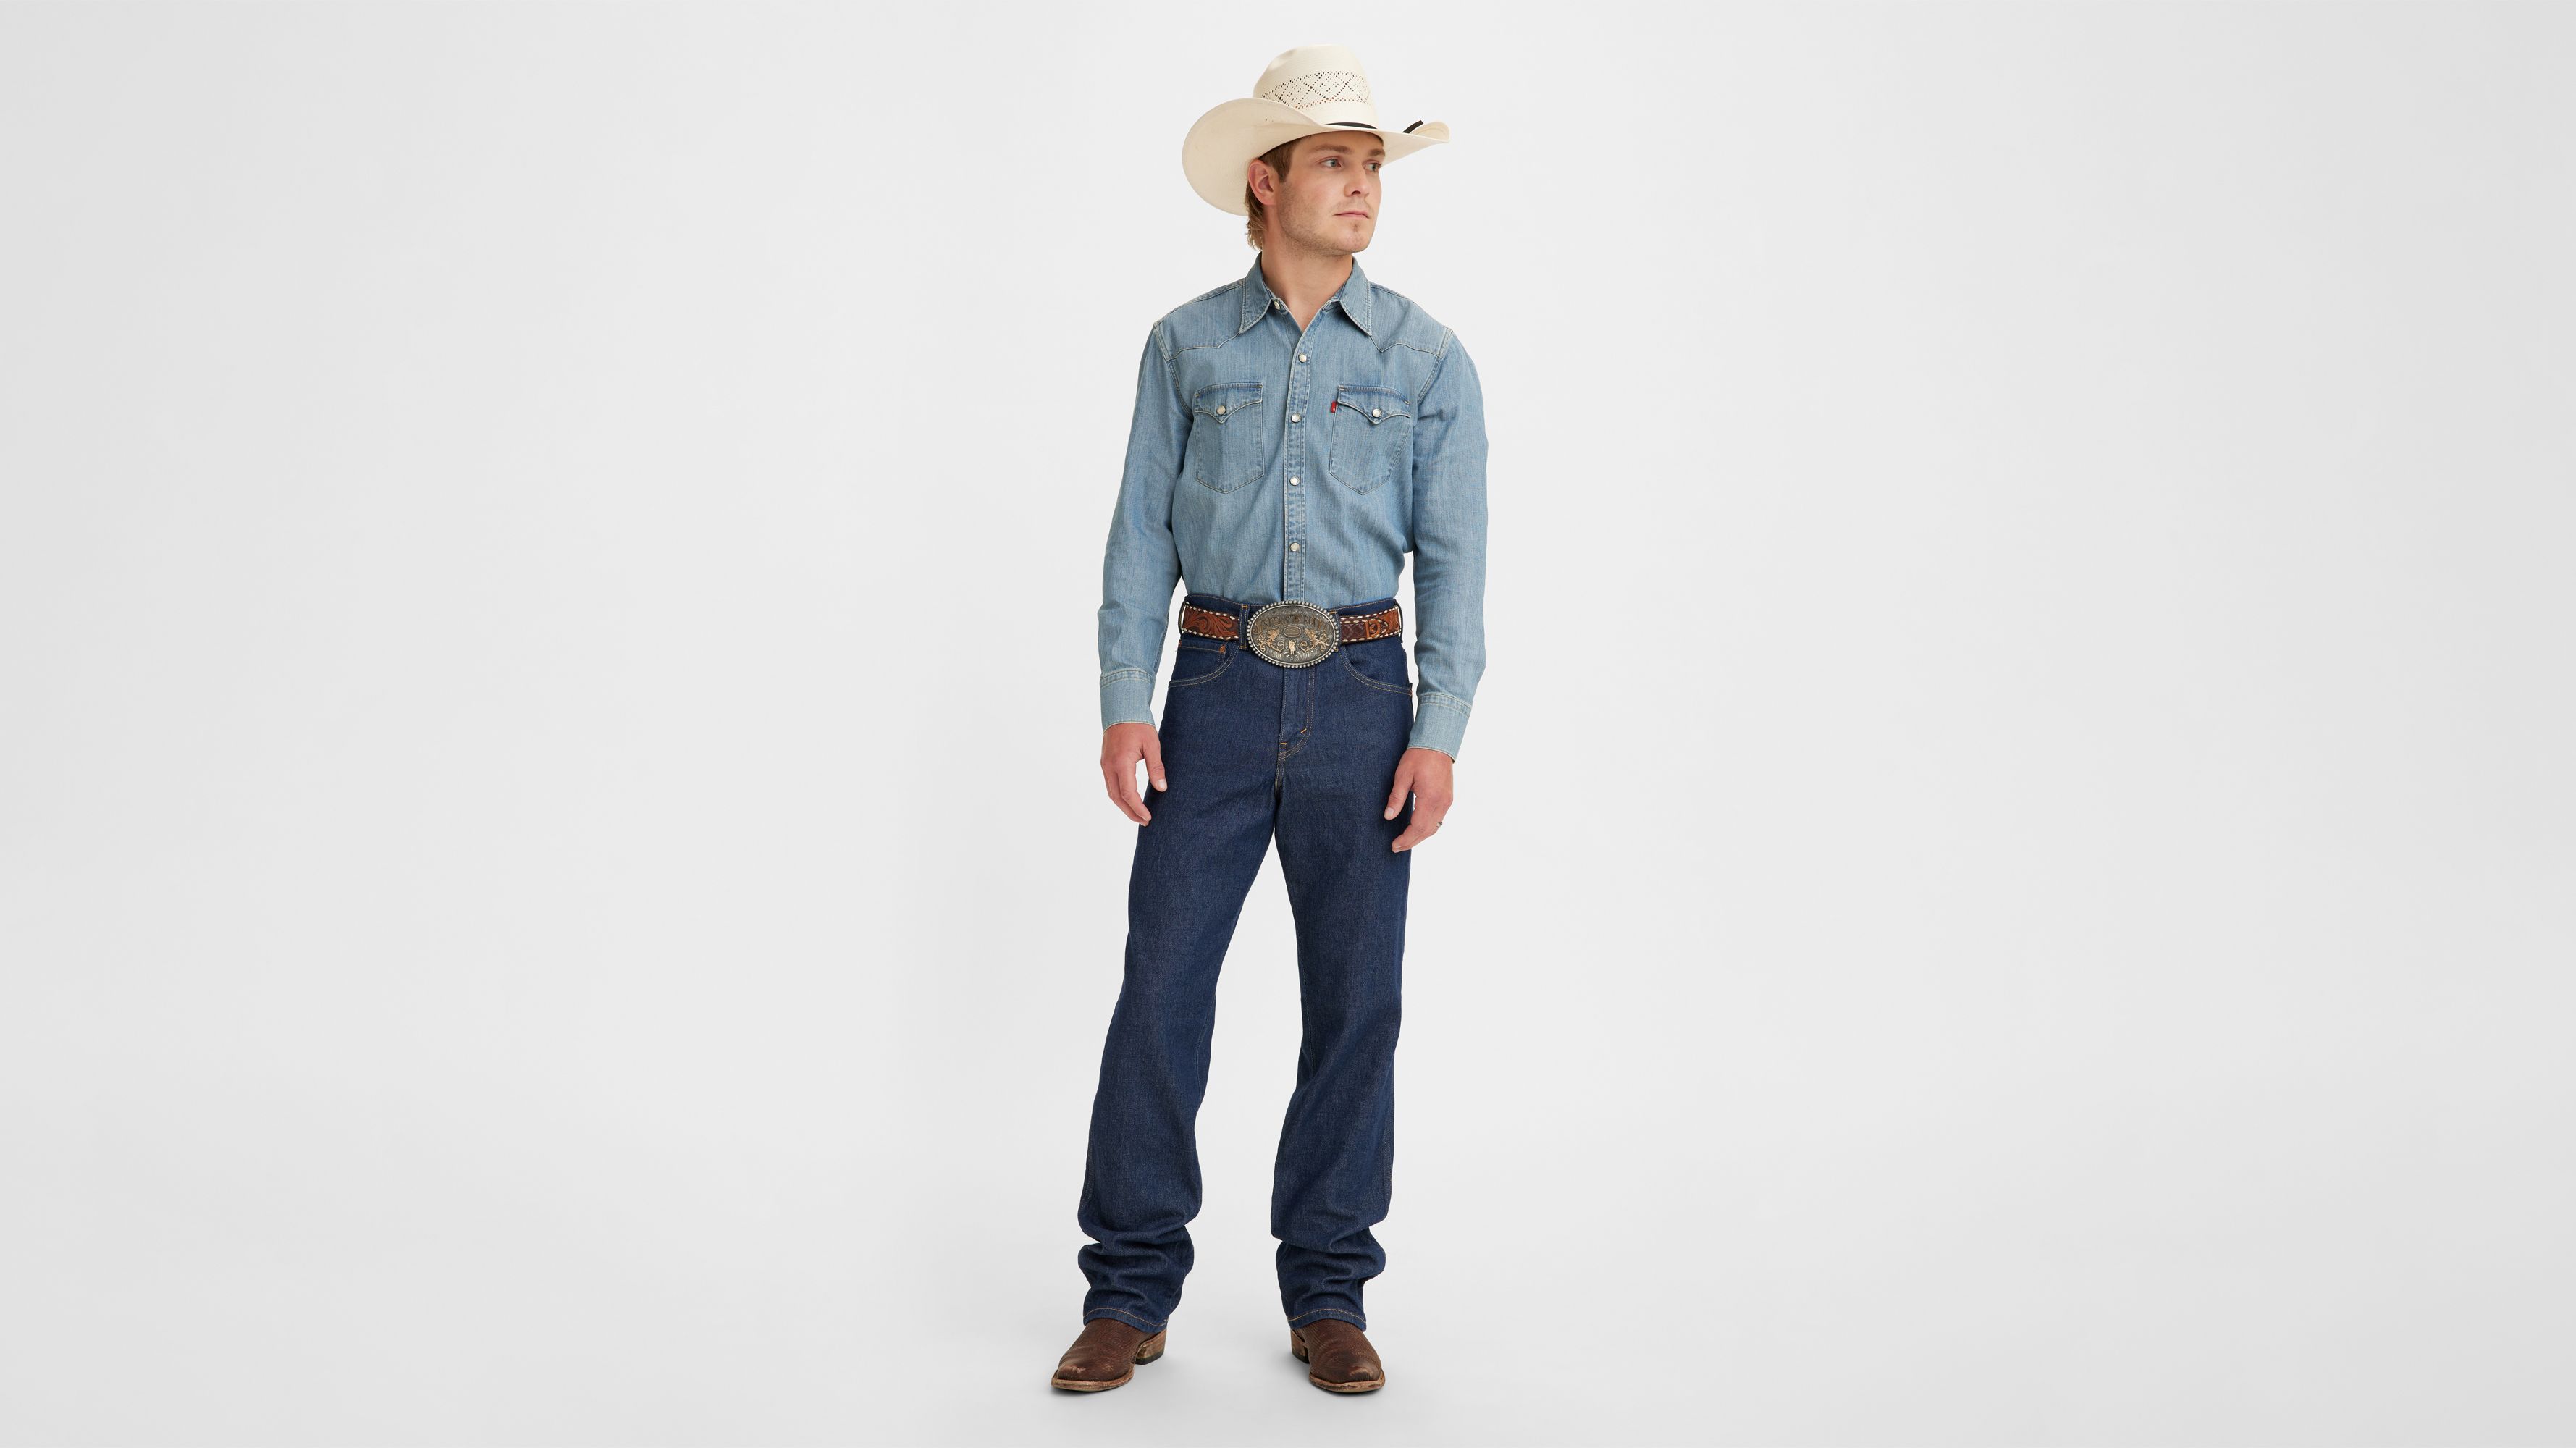 Relaxed Western Fit Men's Jeans - Dark Wash | Levi's® US